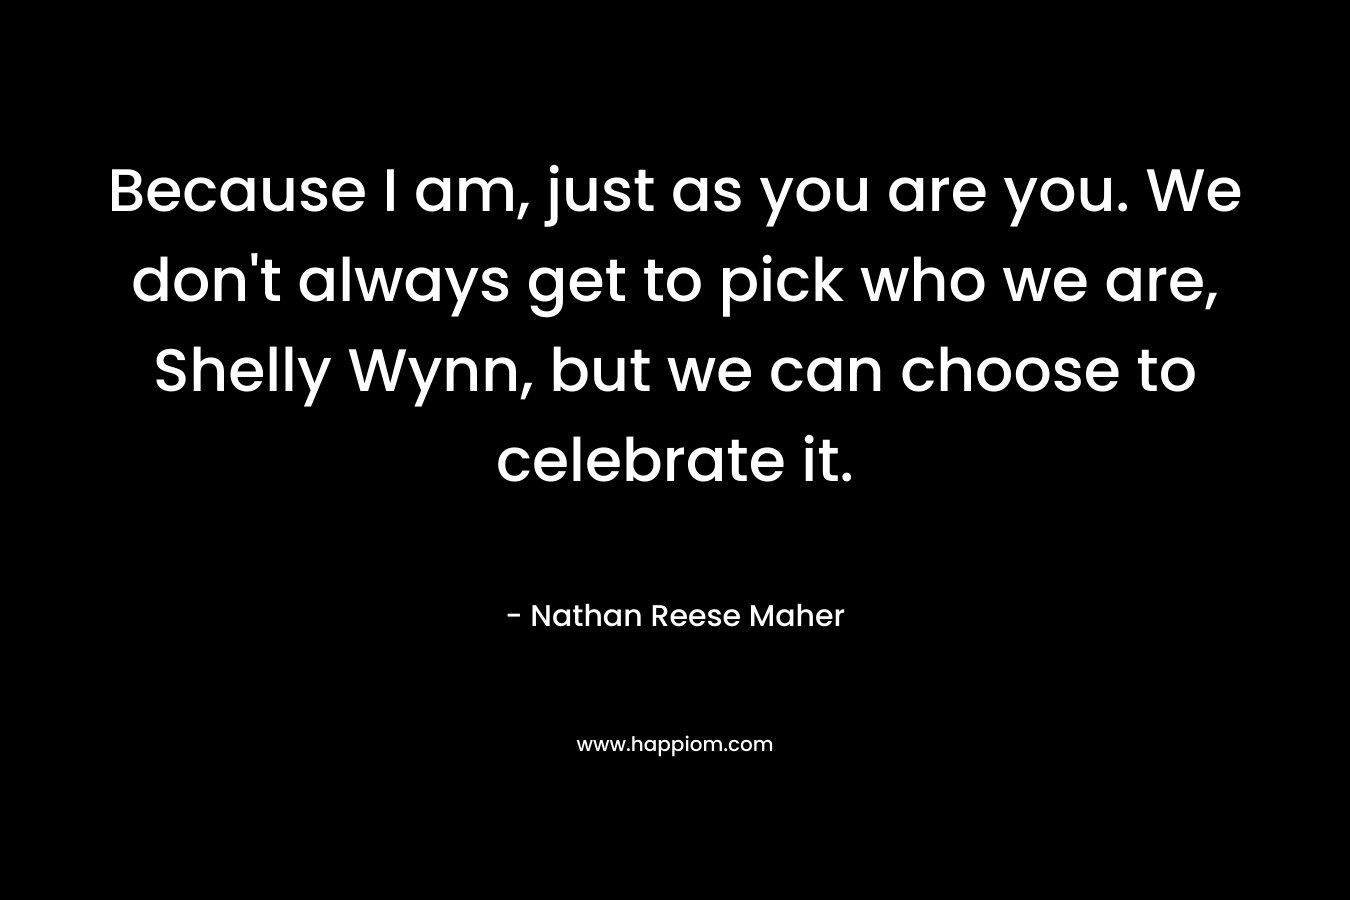 Because I am, just as you are you. We don’t always get to pick who we are, Shelly Wynn, but we can choose to celebrate it. – Nathan Reese Maher